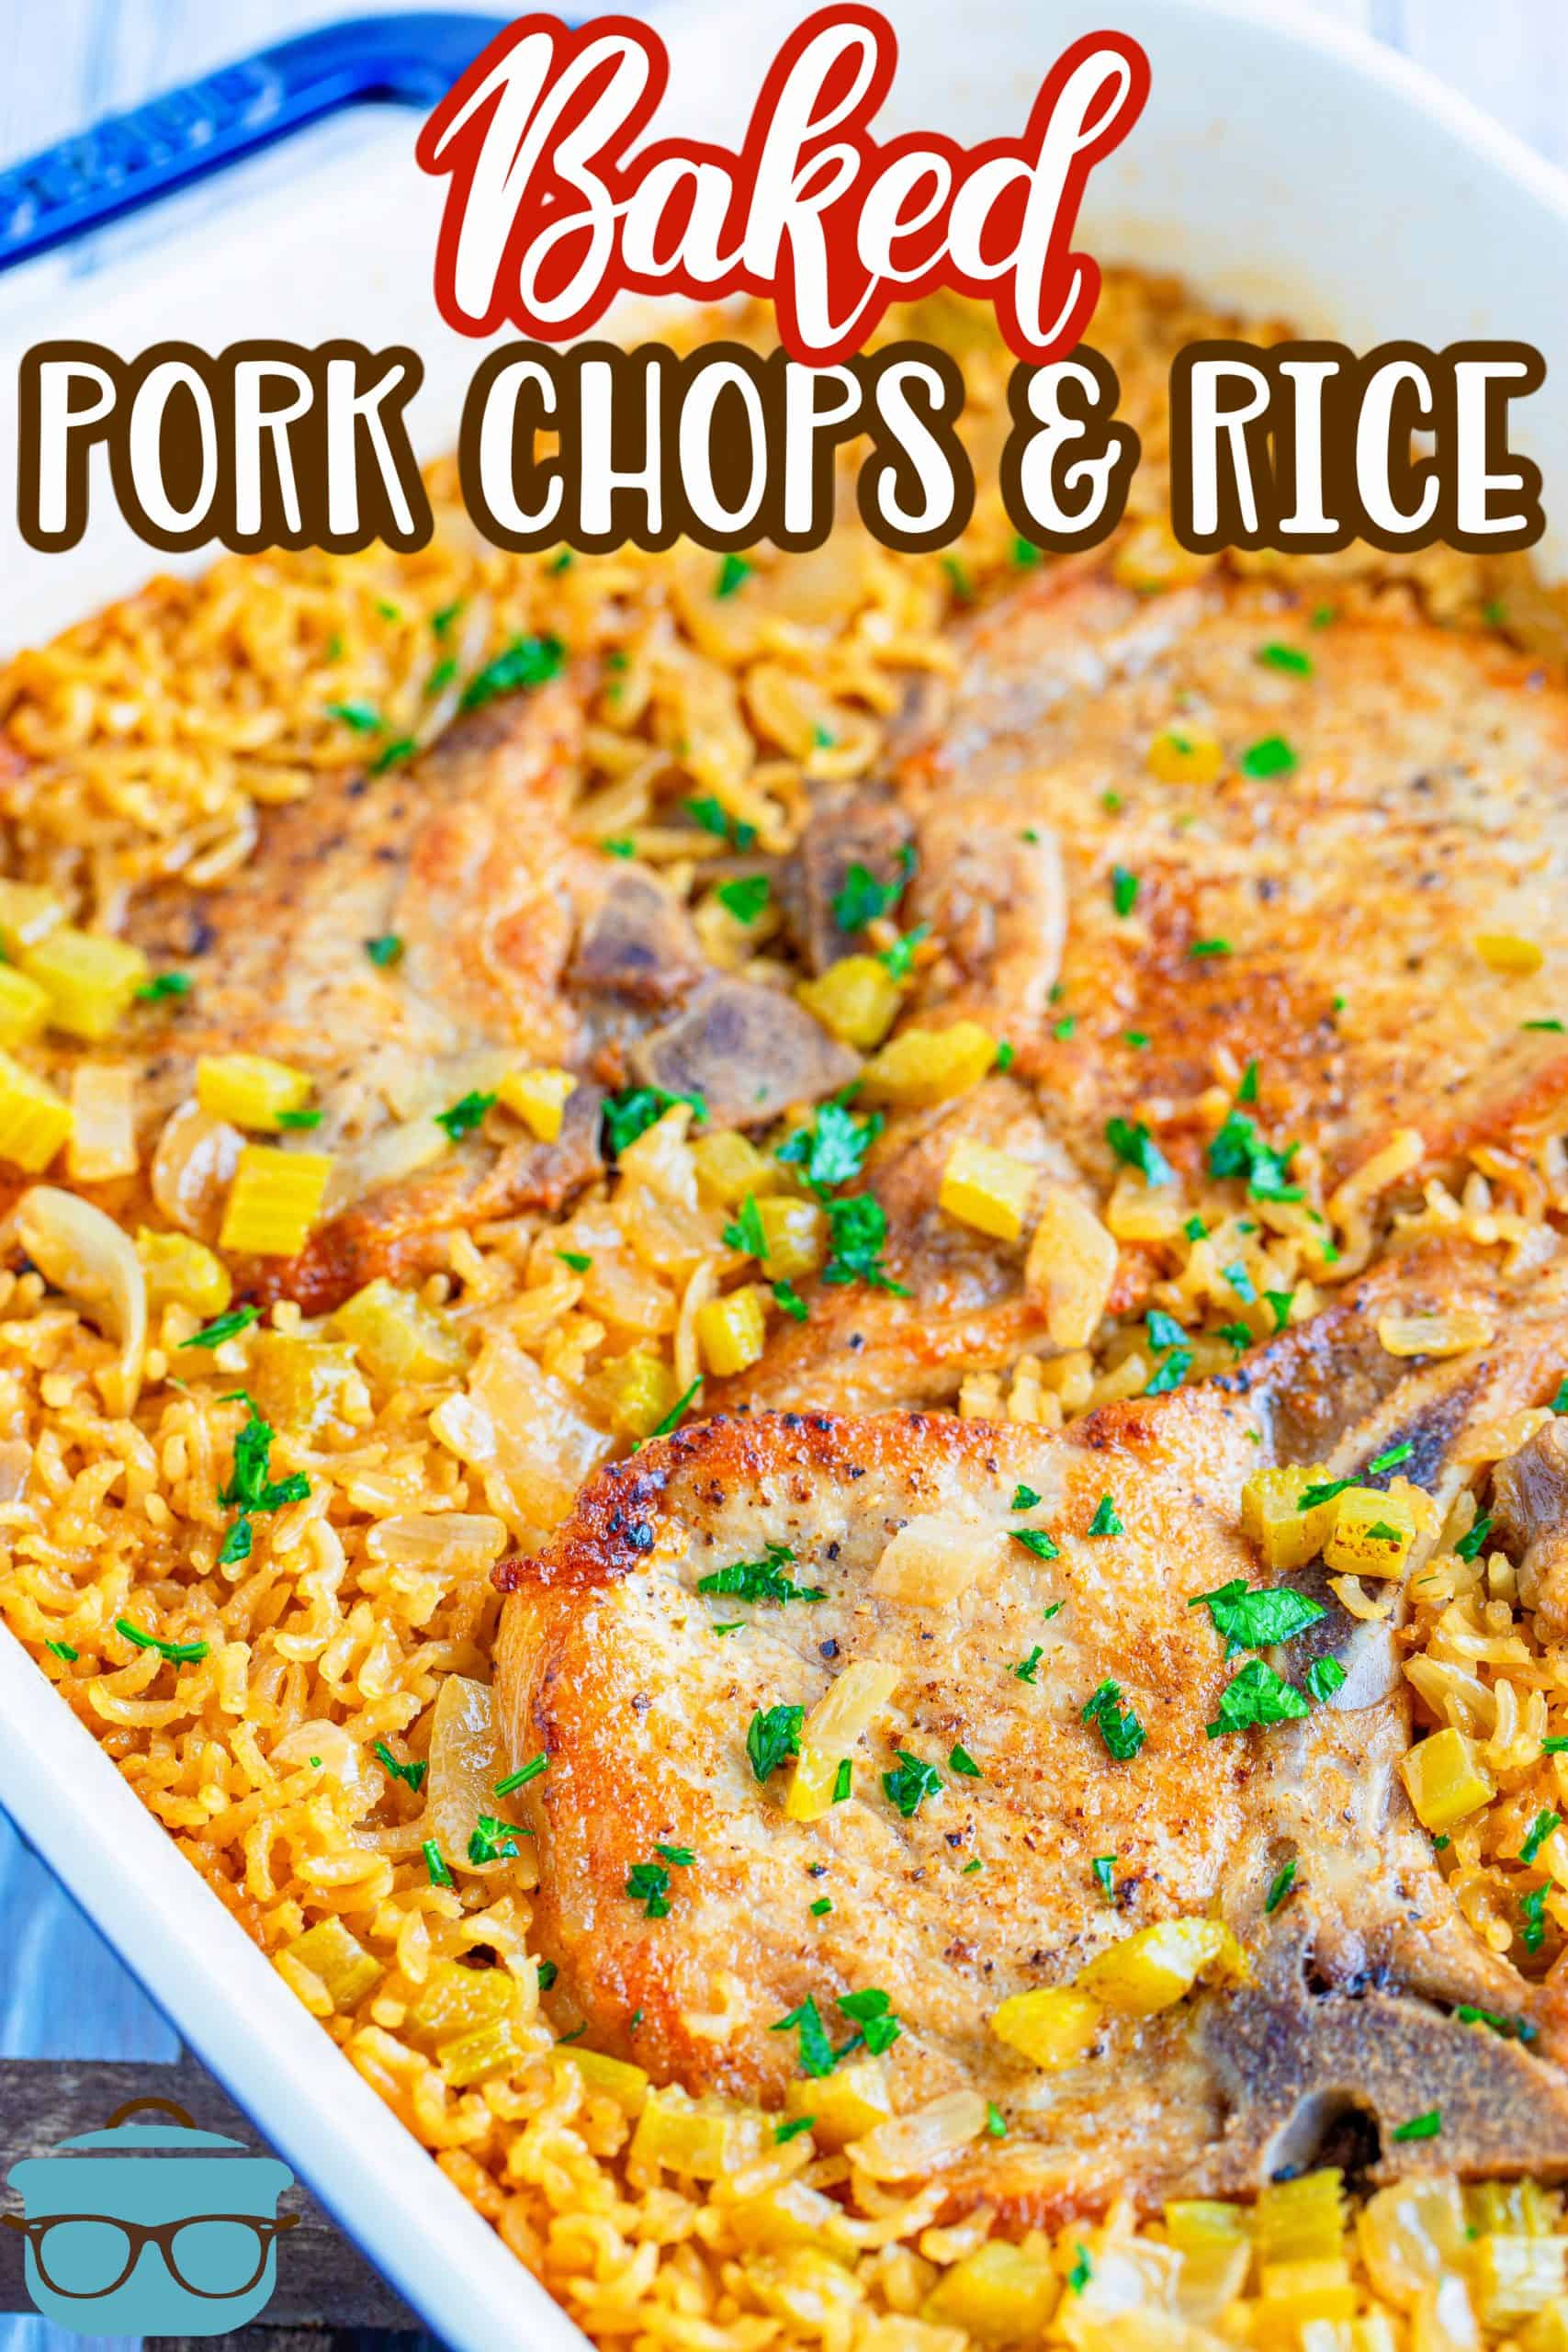 Baked Pork Chops and Rice shown in a square baking dish and topped with chopped parsley.